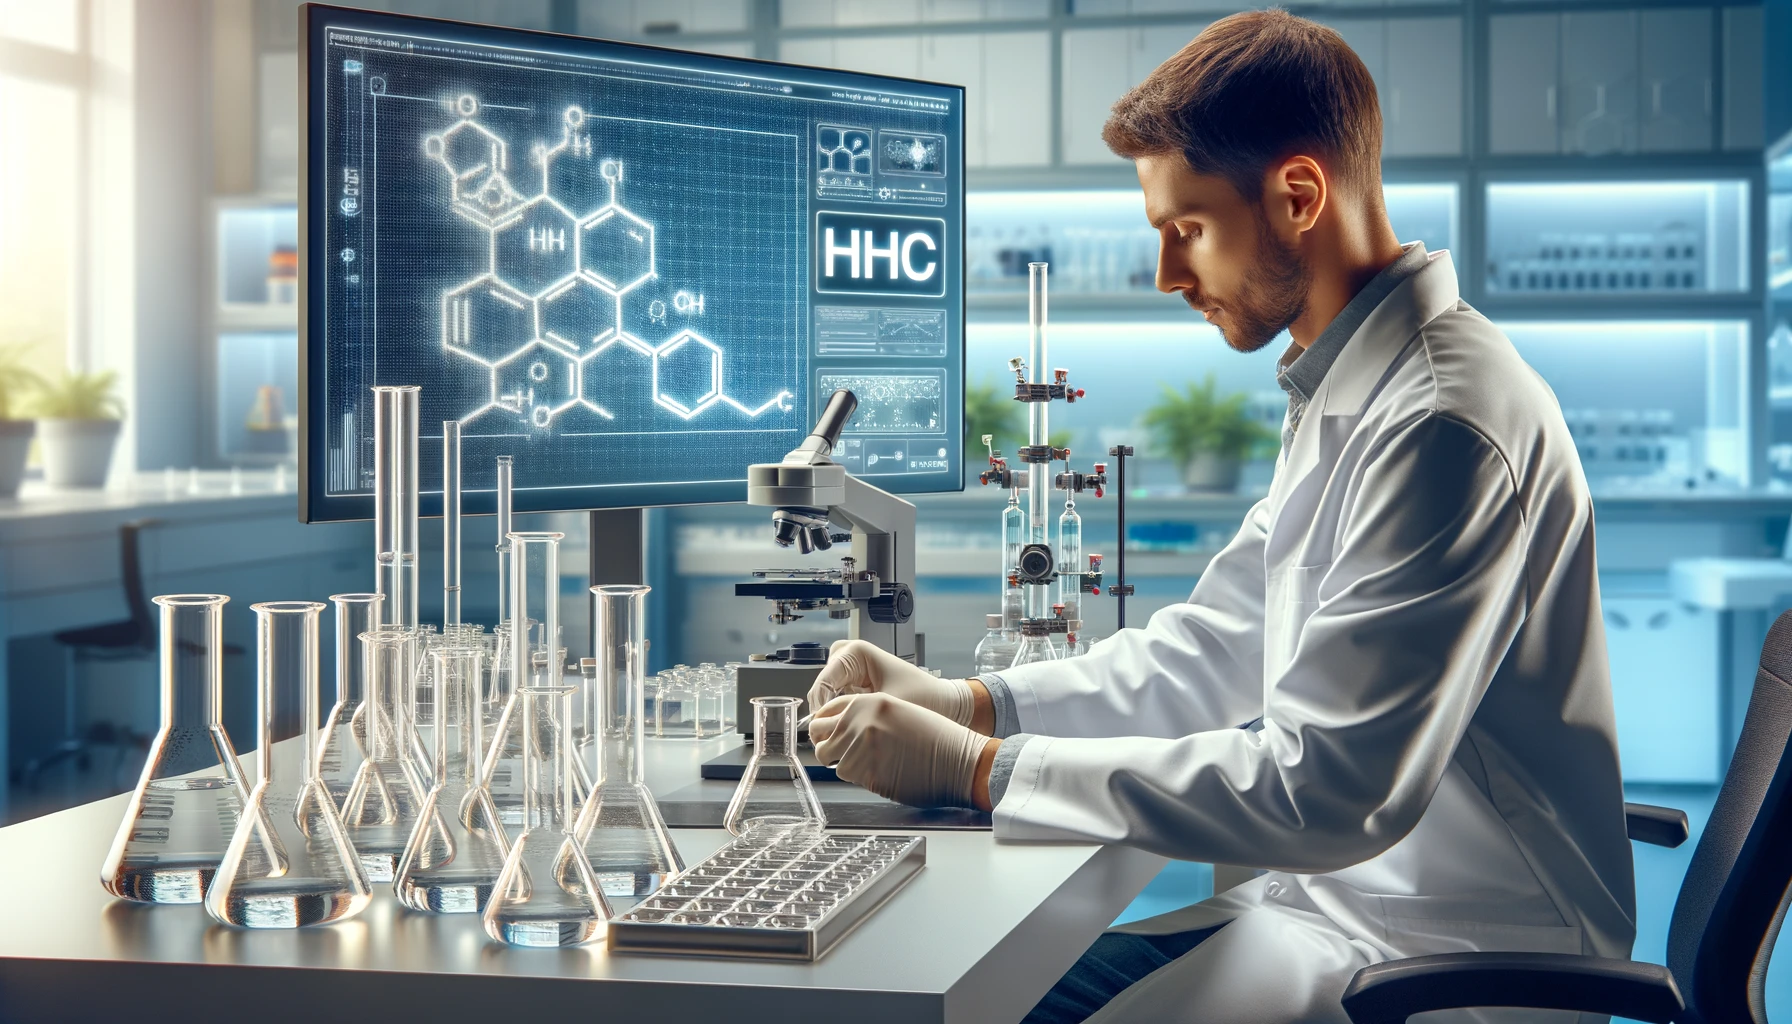 Scientist synthesizing HHC in a laboratory